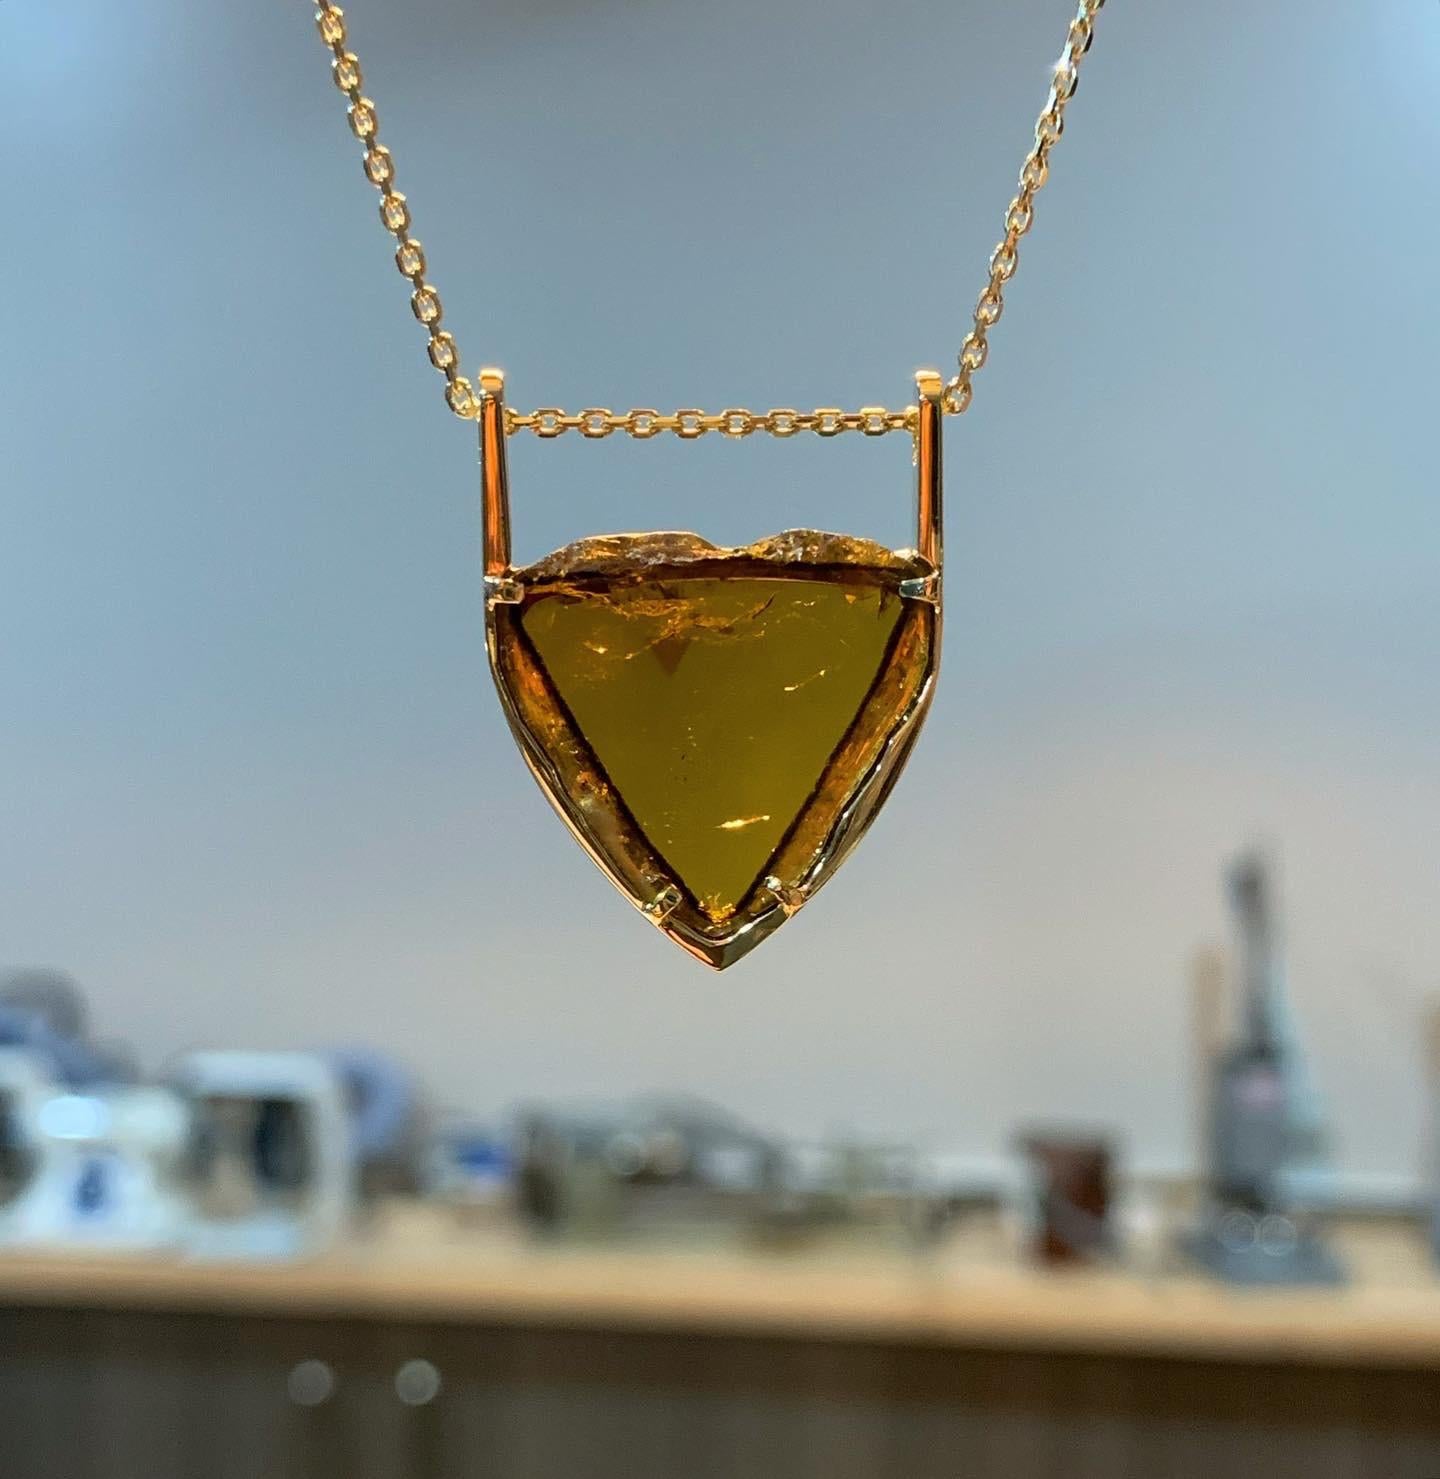 This lovely and one-of-a-kind 18k yellow gold necklace features a beautiful amber toned Liddicoatite tourmaline with a hidden secret!  

Can you spot the small natural pink triangle within the gem?  This unique feature within the gem is why this